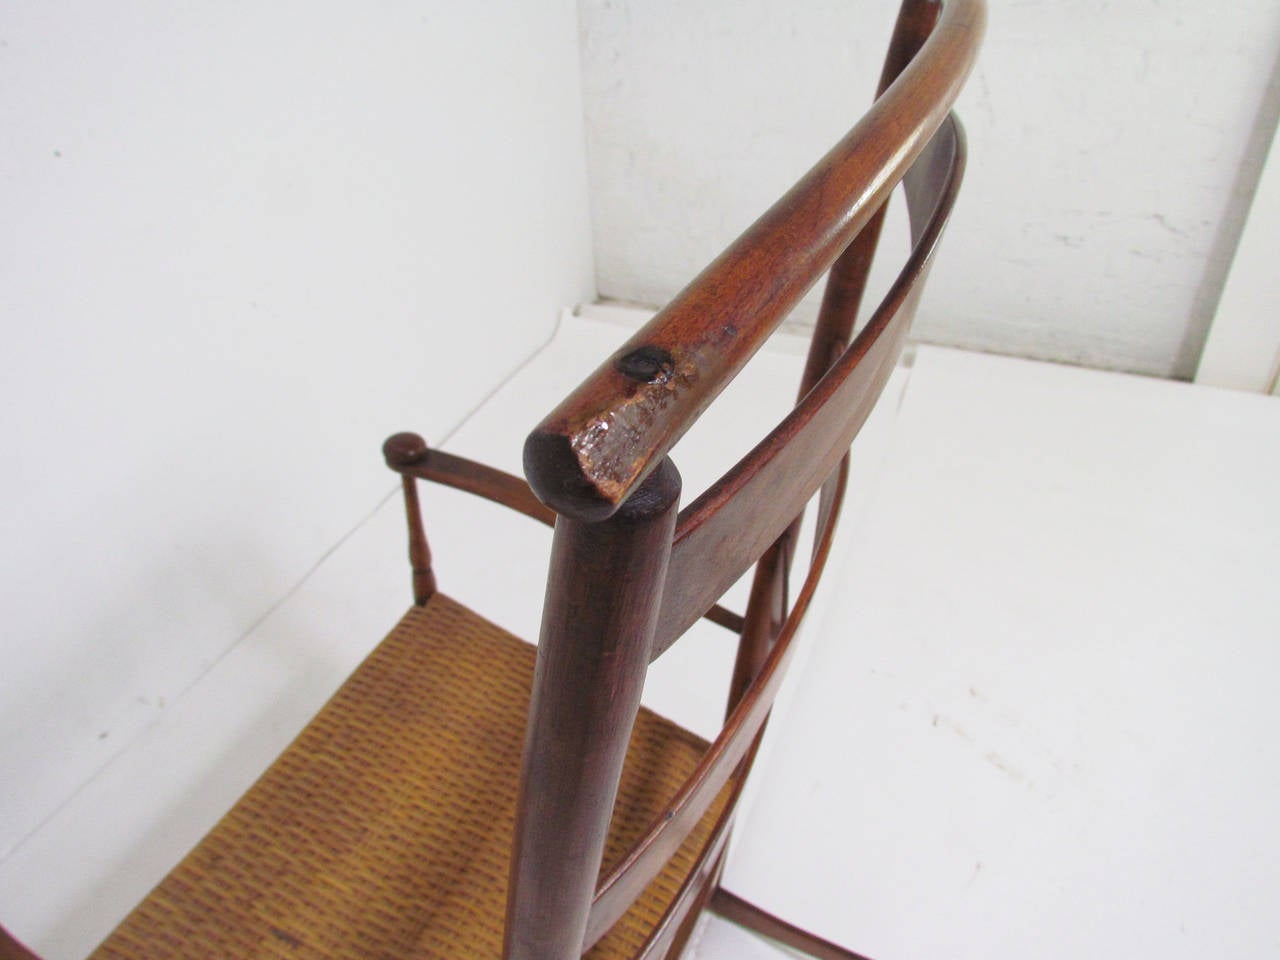 Late 19th Century Antique Shaker No. 7 Rocking Chair with Shawl Bar